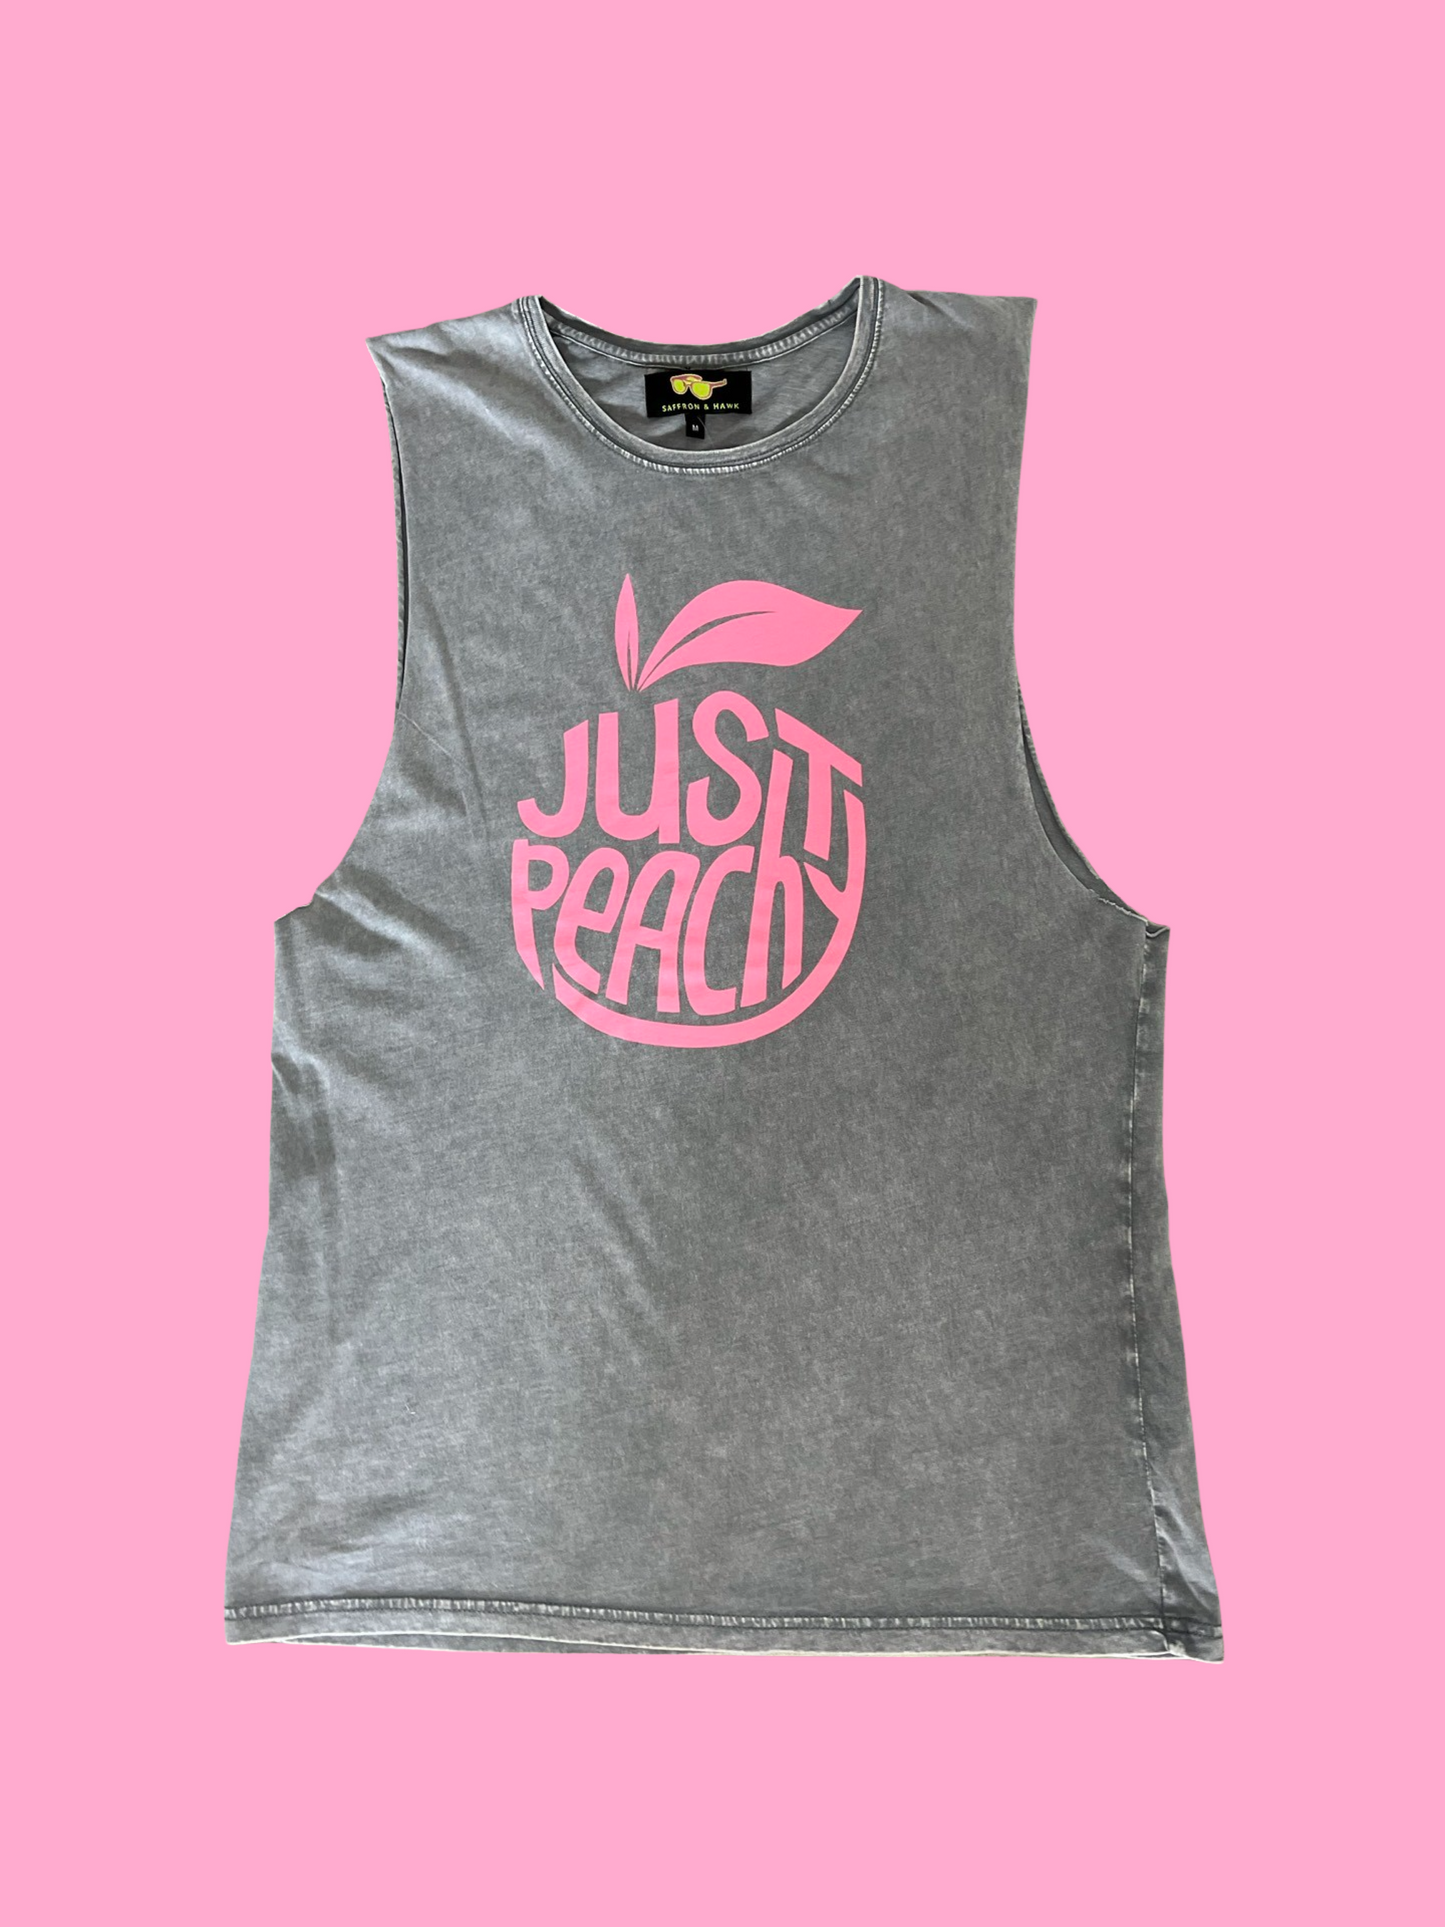 Just Peachy Tank- Stone wash grey with pink